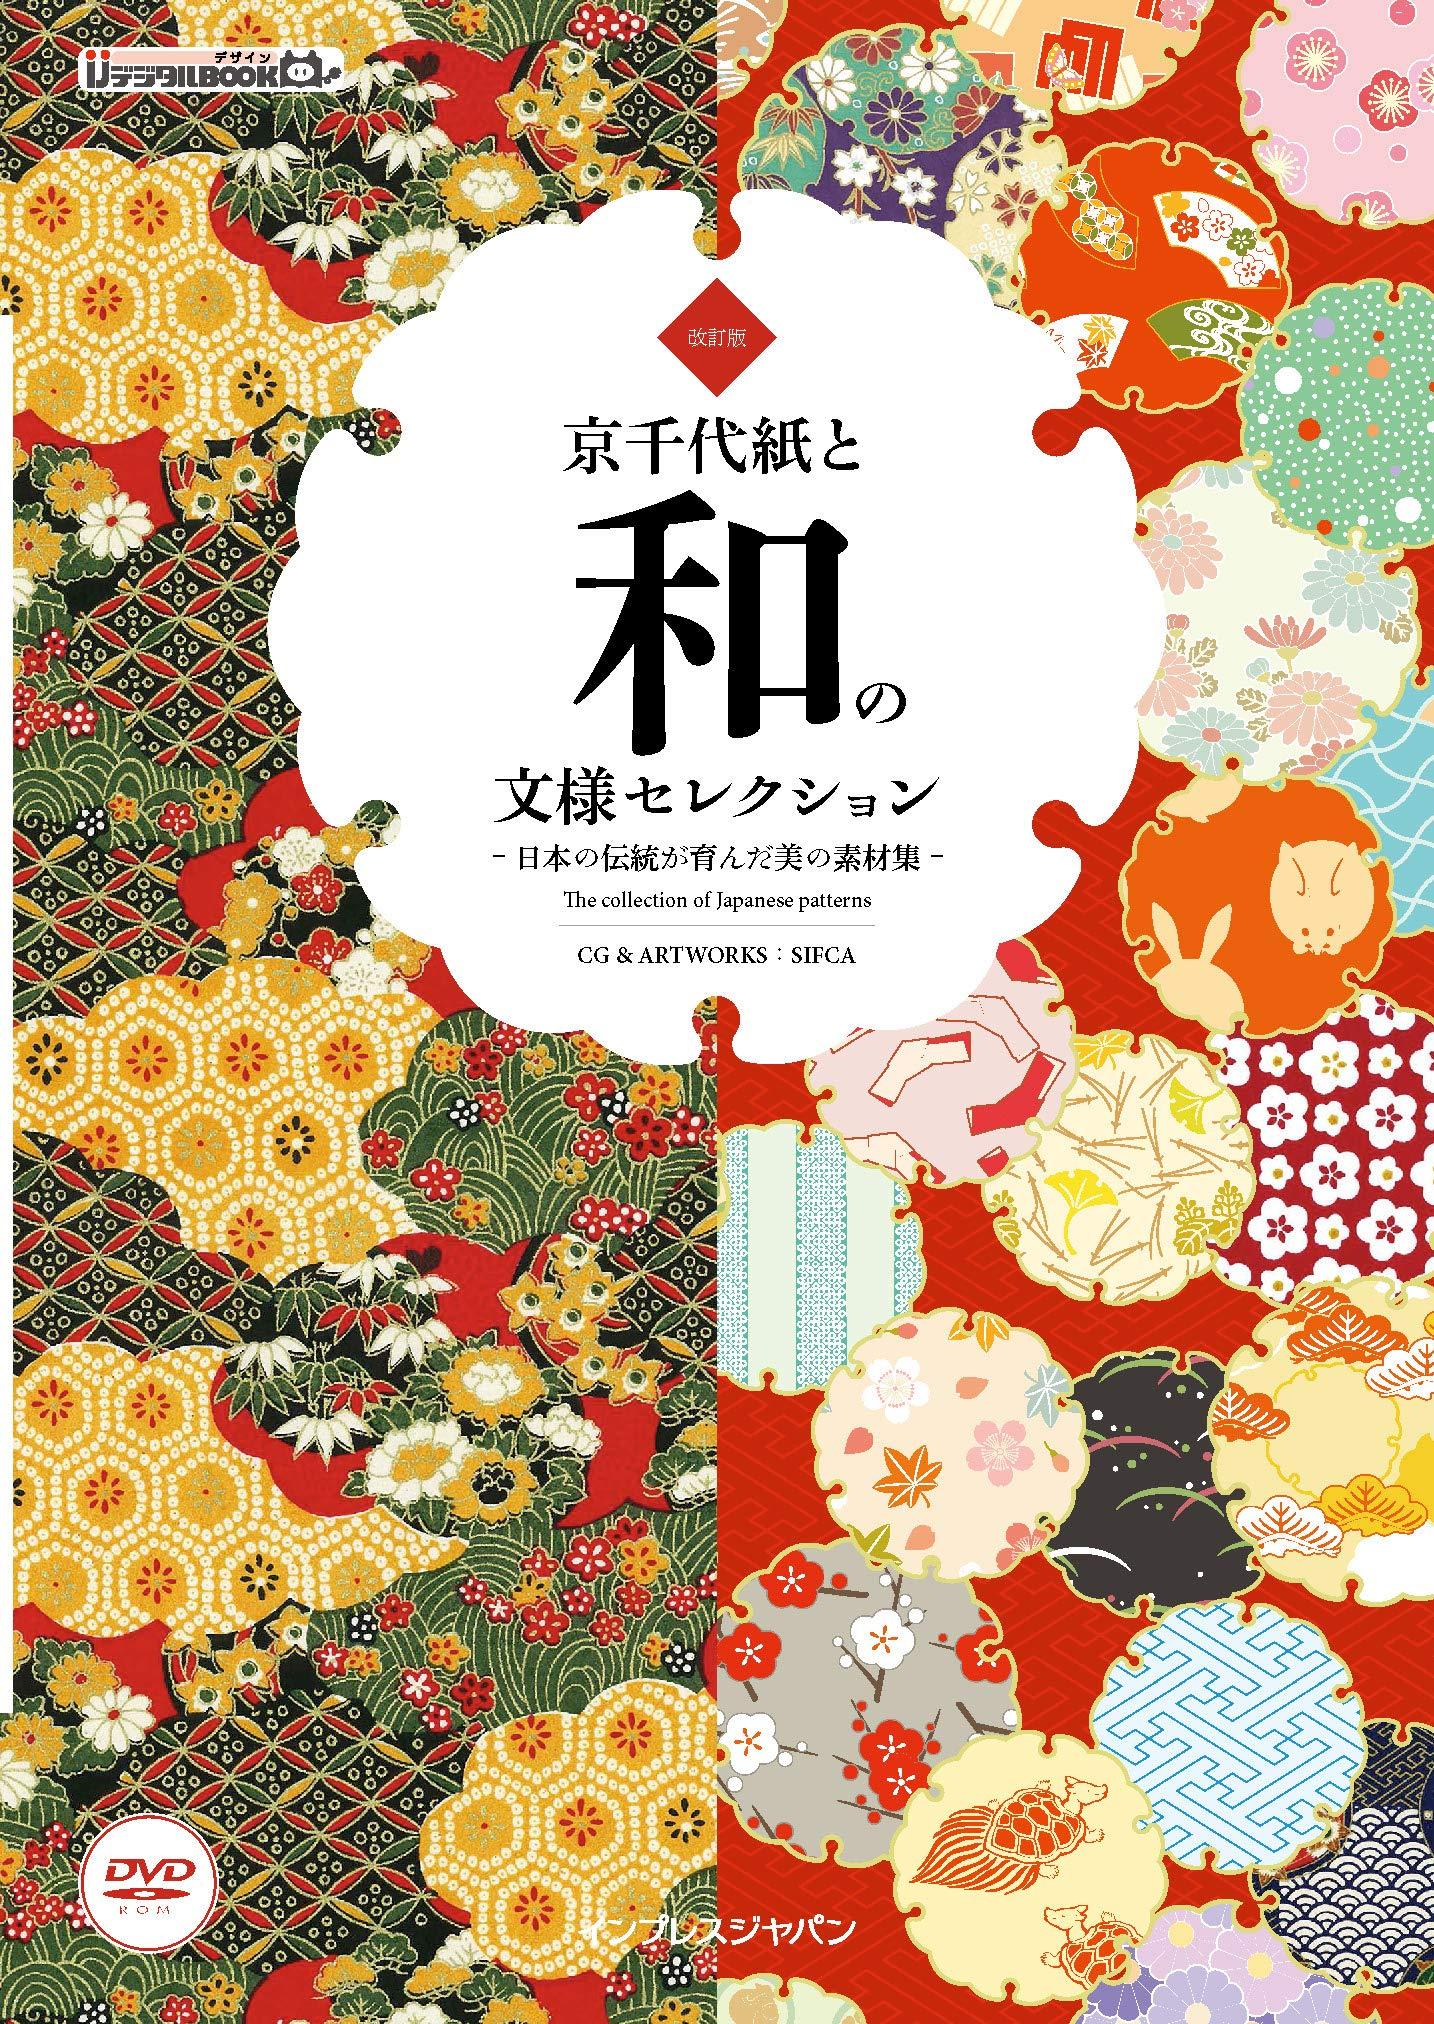 Yun Beauty Tradition of Japan Brought Up (origami Paper )